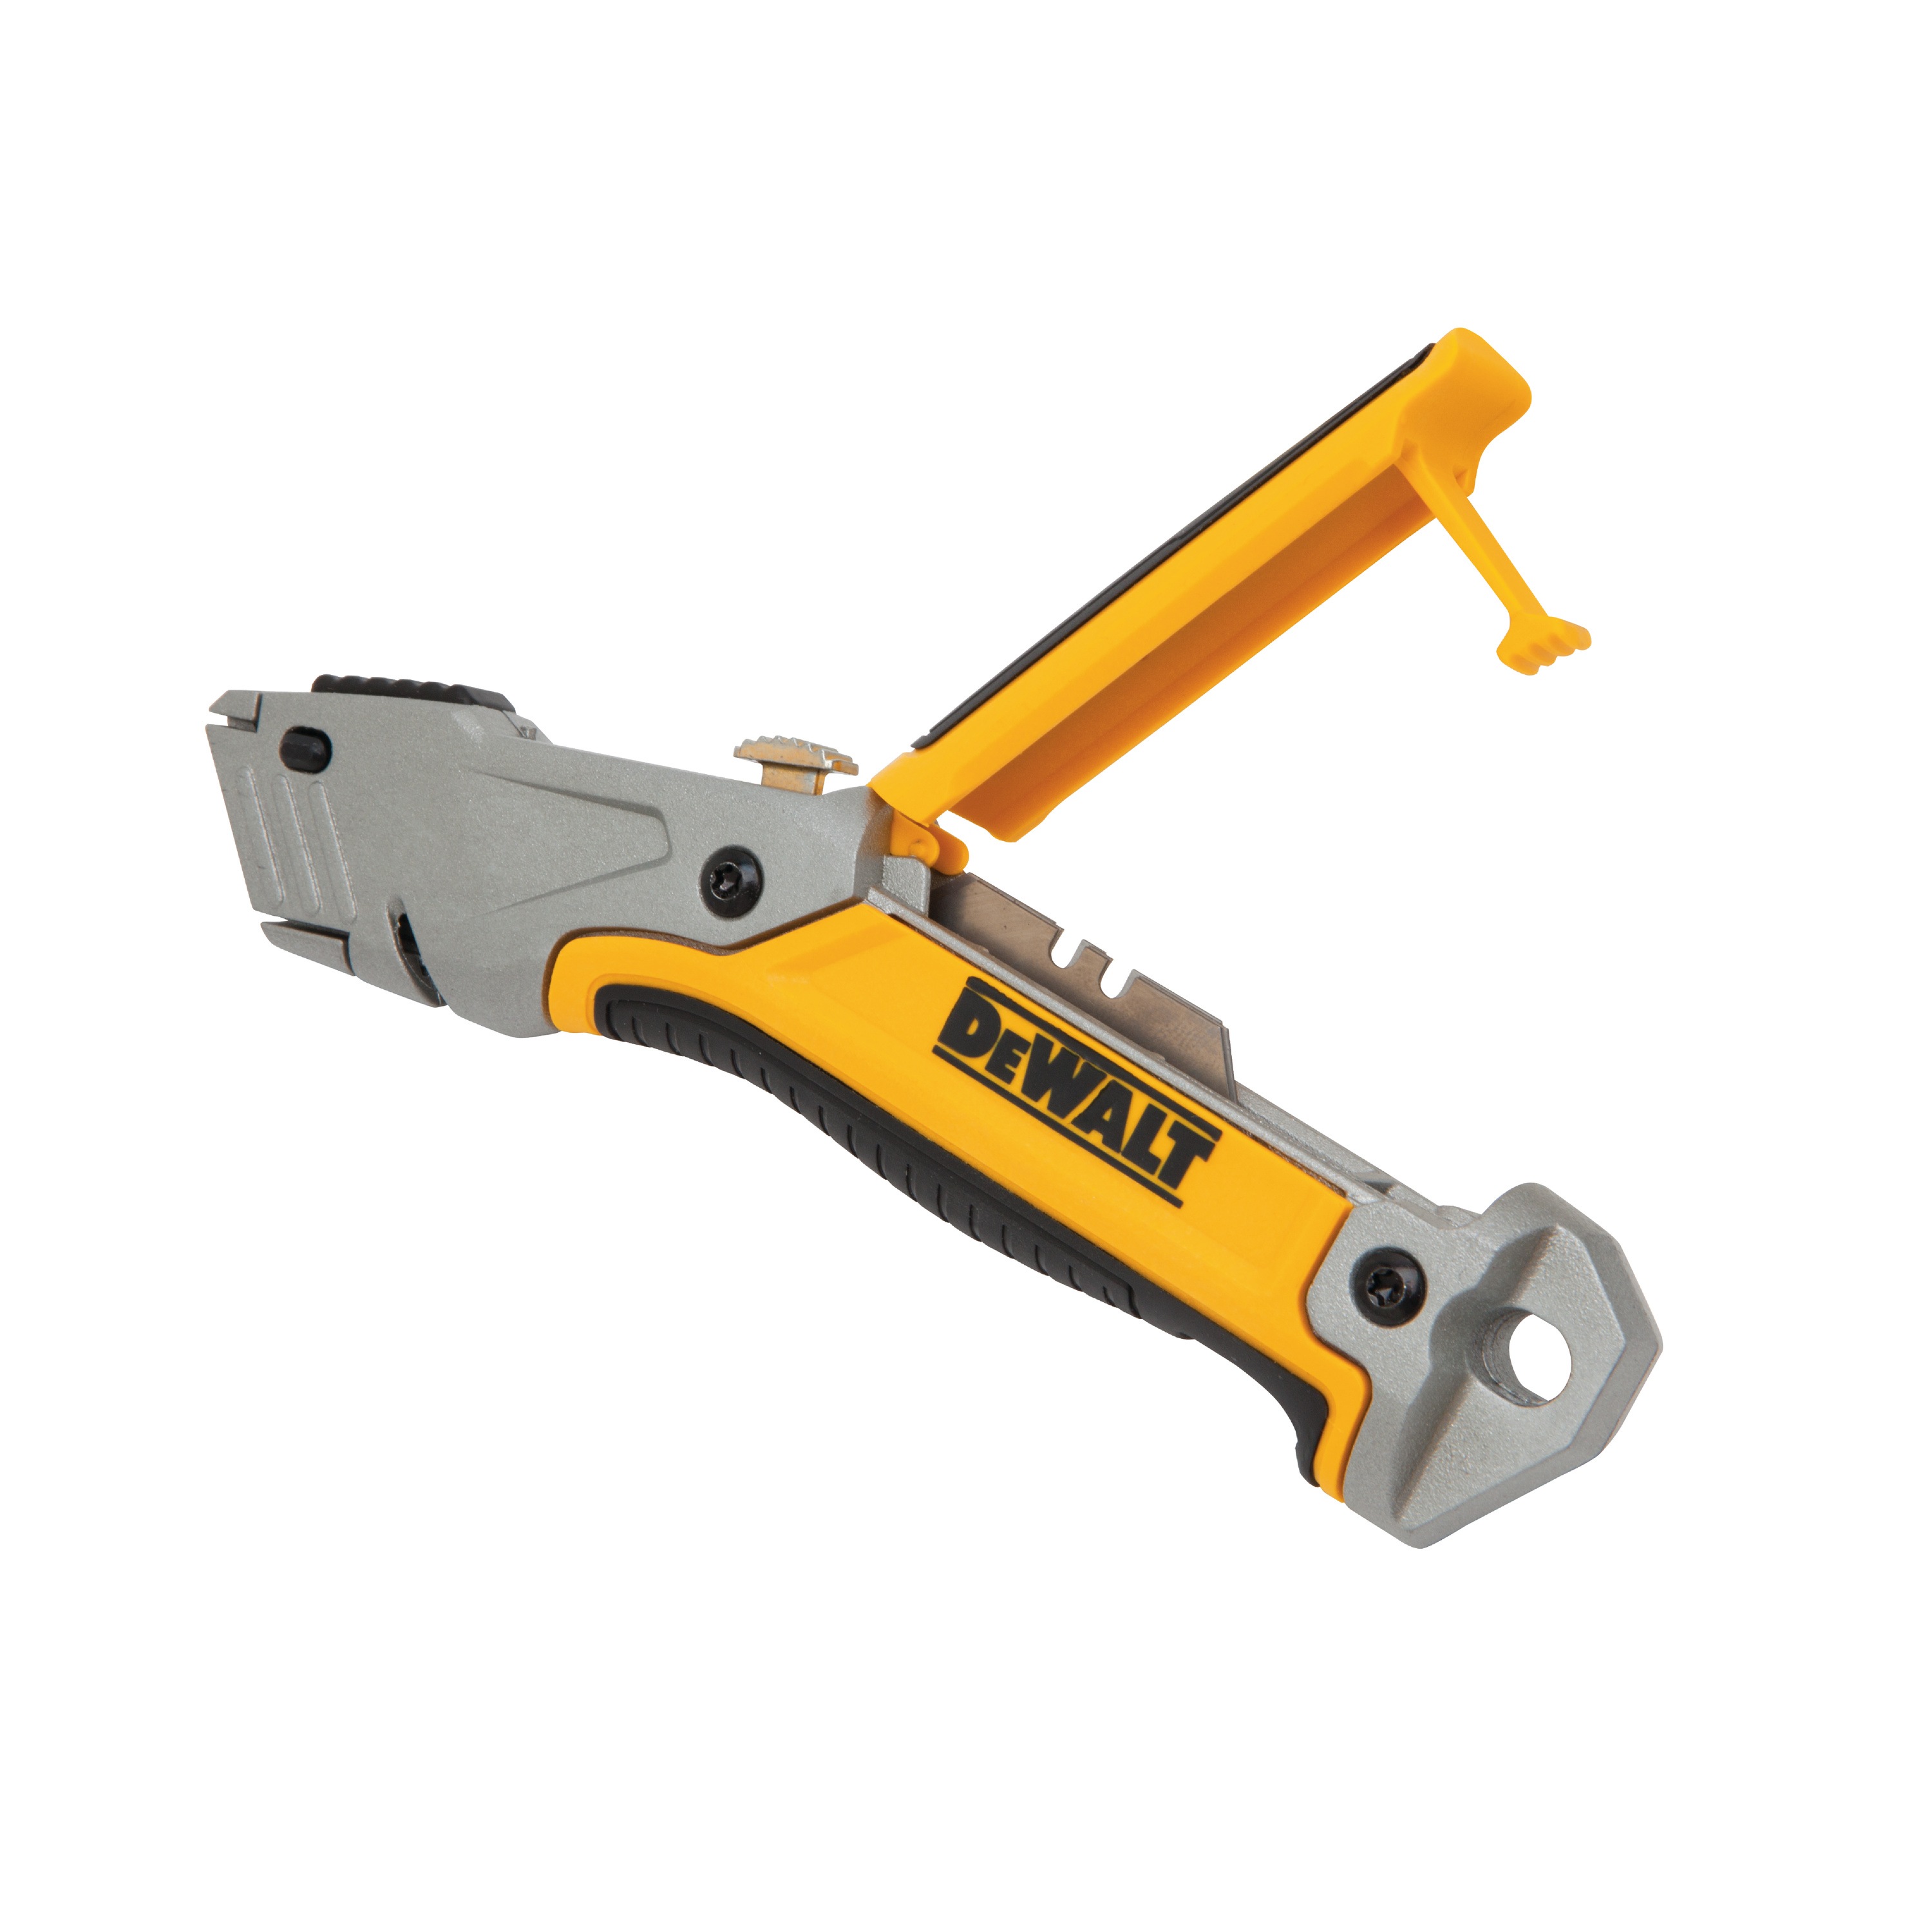 Profile of Retractable utility knife.